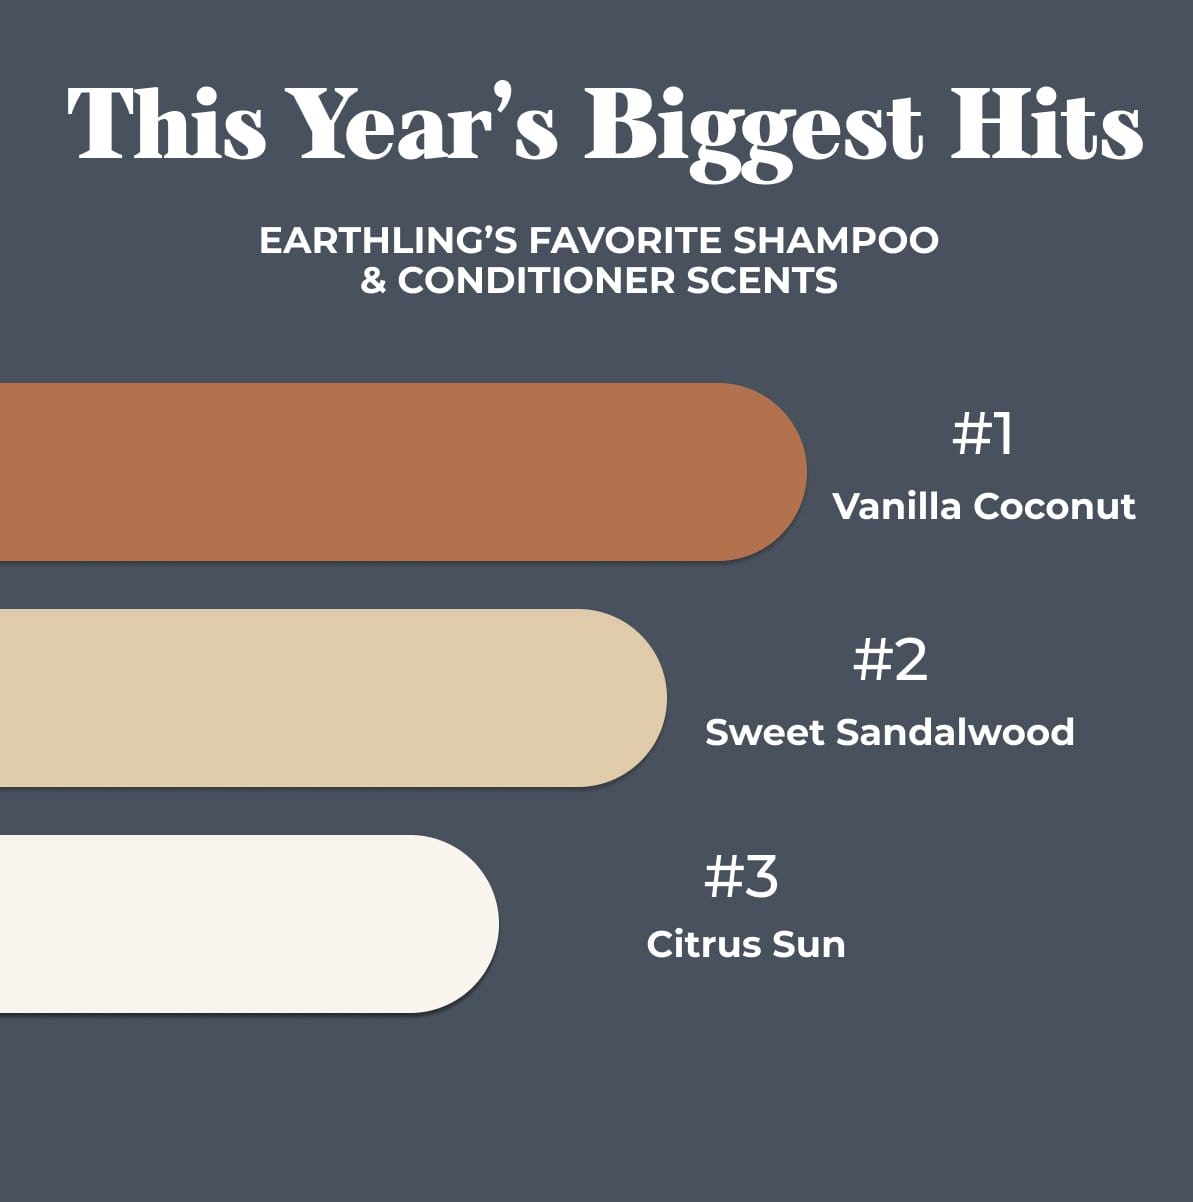 This Year's Biggest Hits